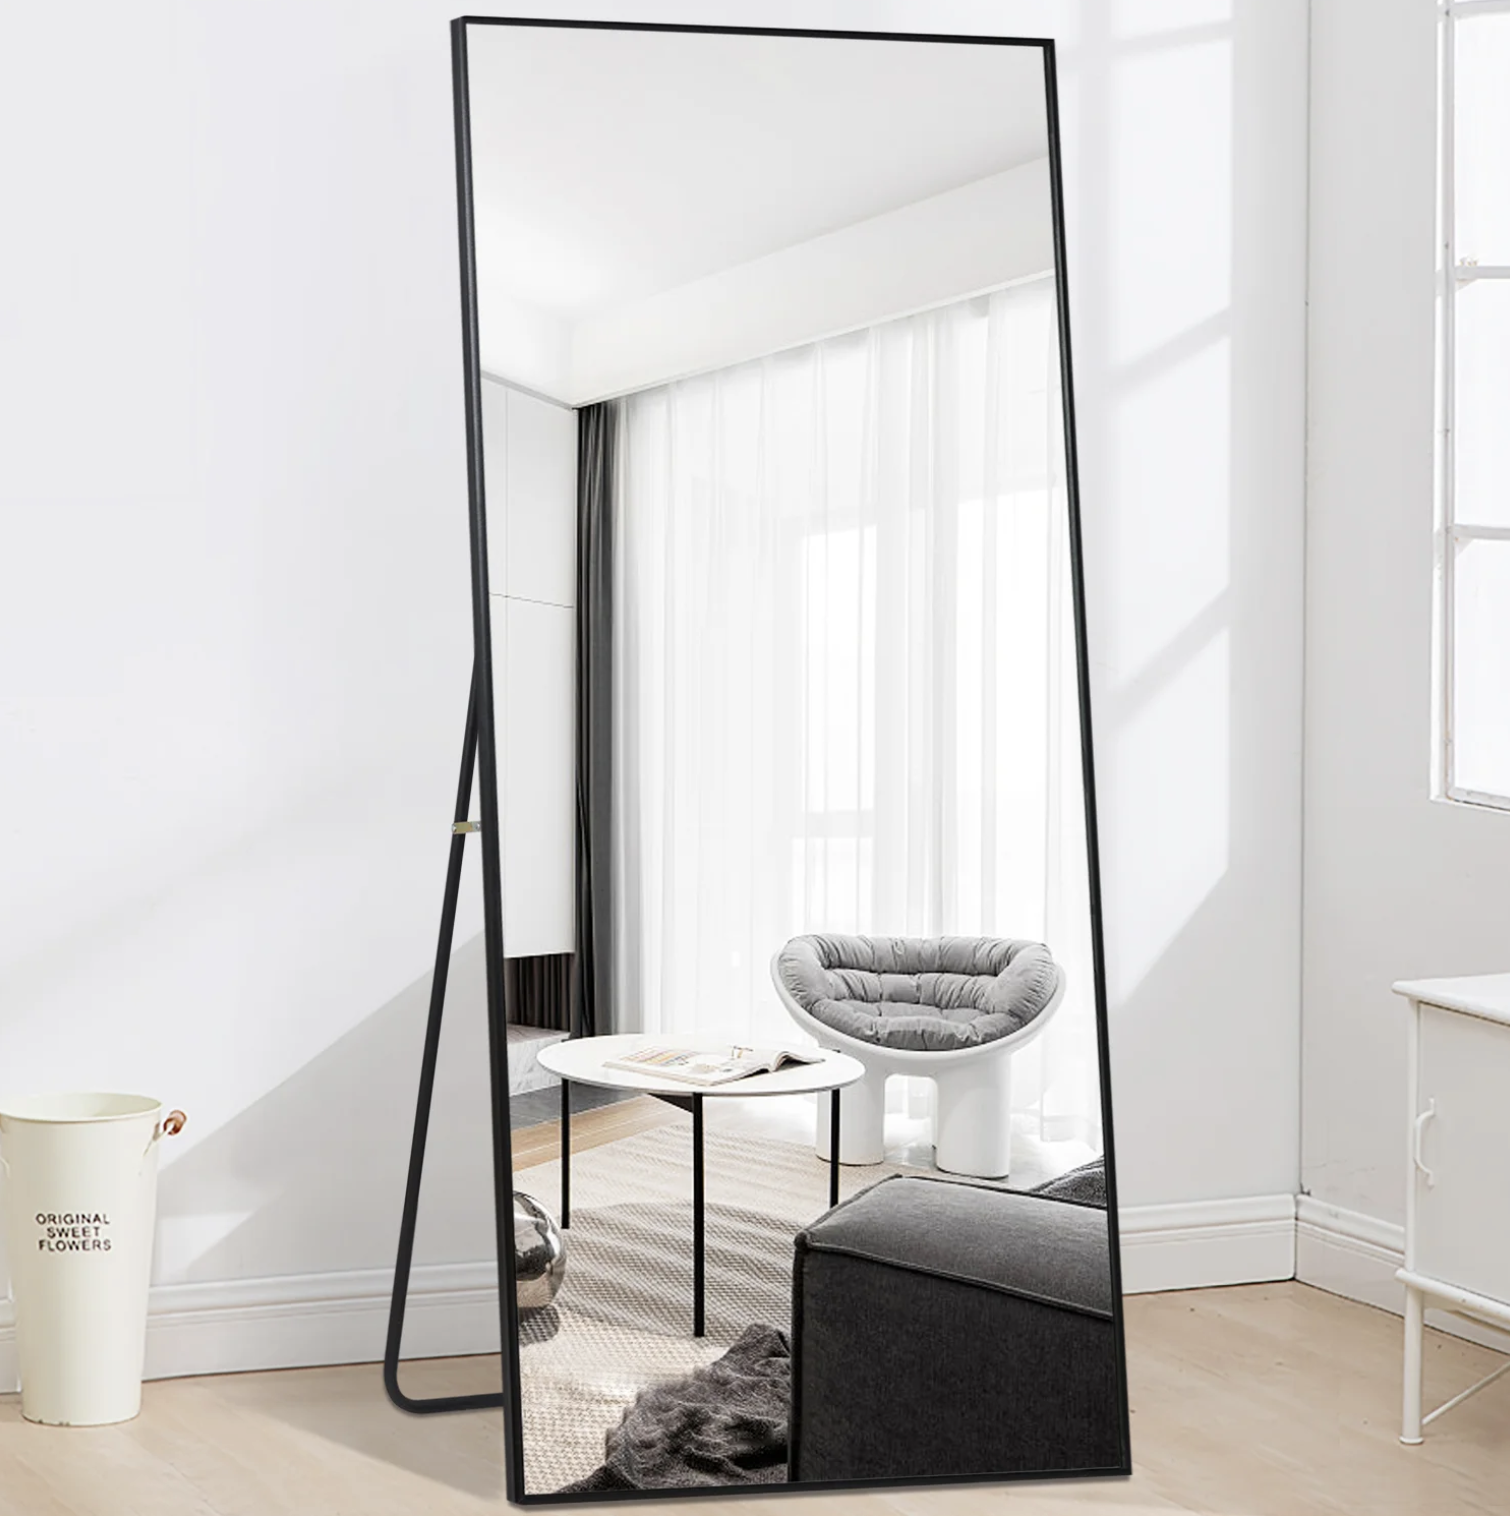 The mirror reflecting a living room with a chair, table, and couch in it